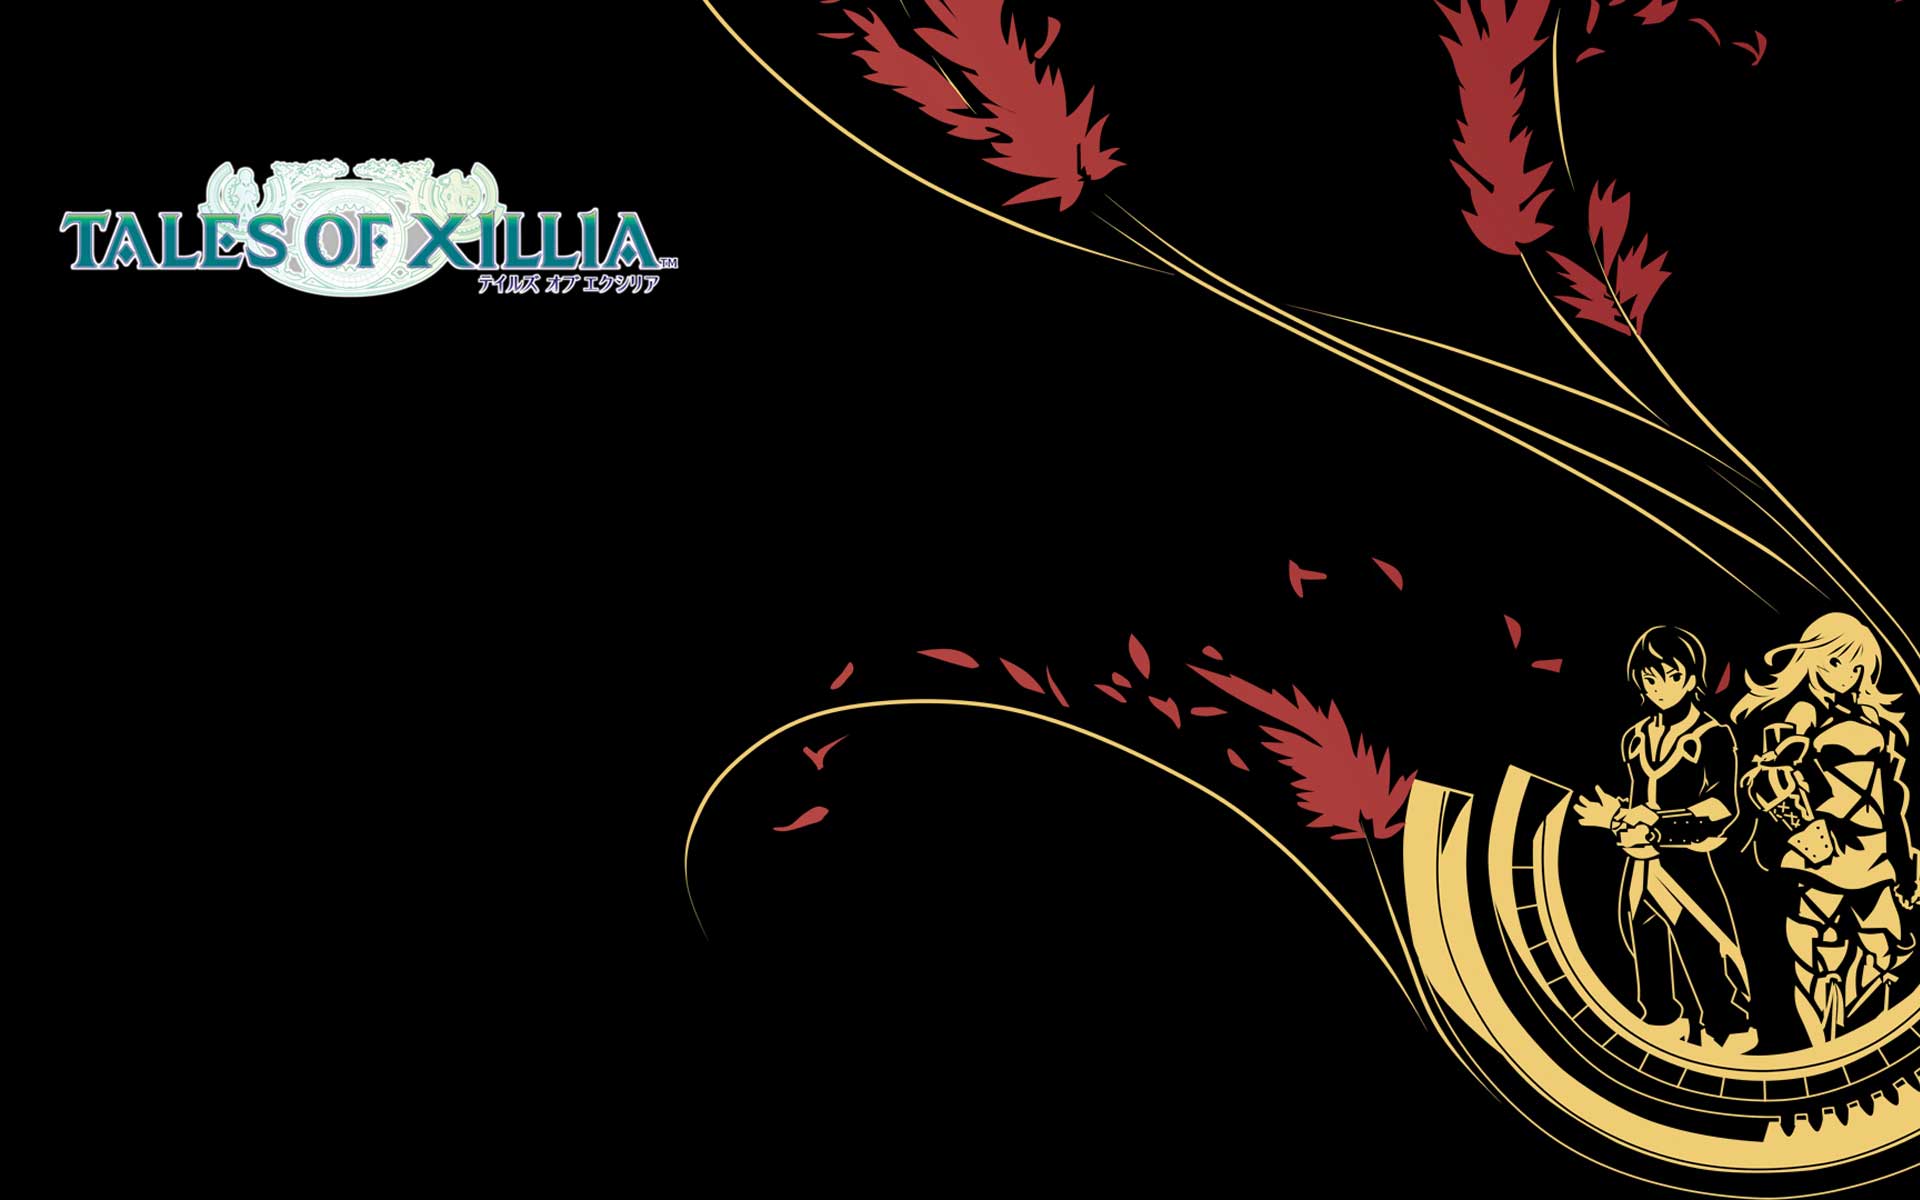 Tales of xillia wallpapers in hd page